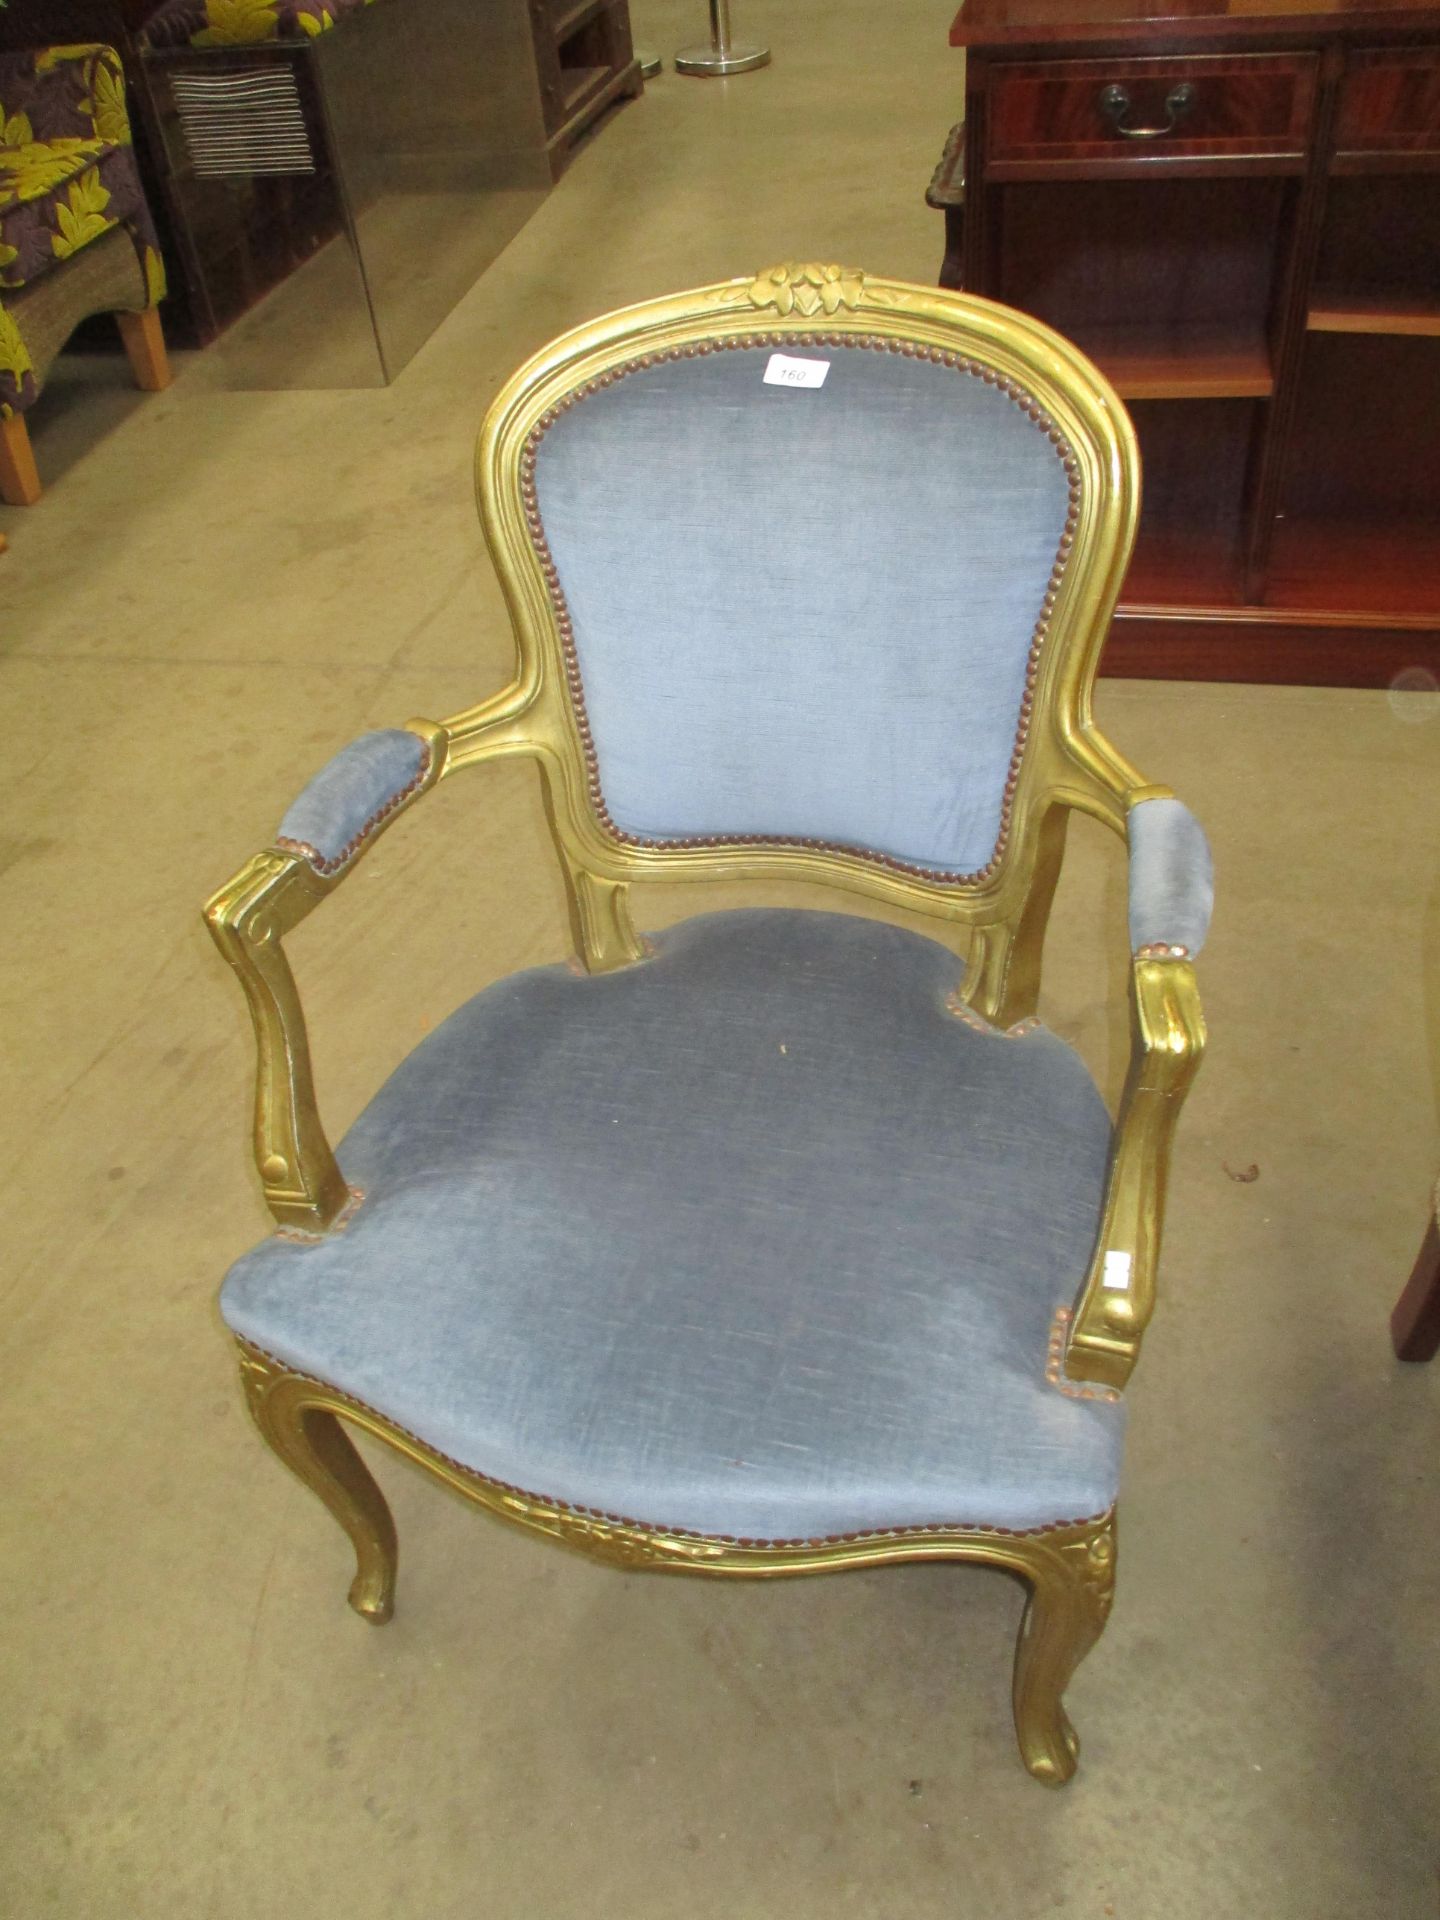 An Italian style gilt framed armchair with blue upholstery (Please note - the upholstery in this